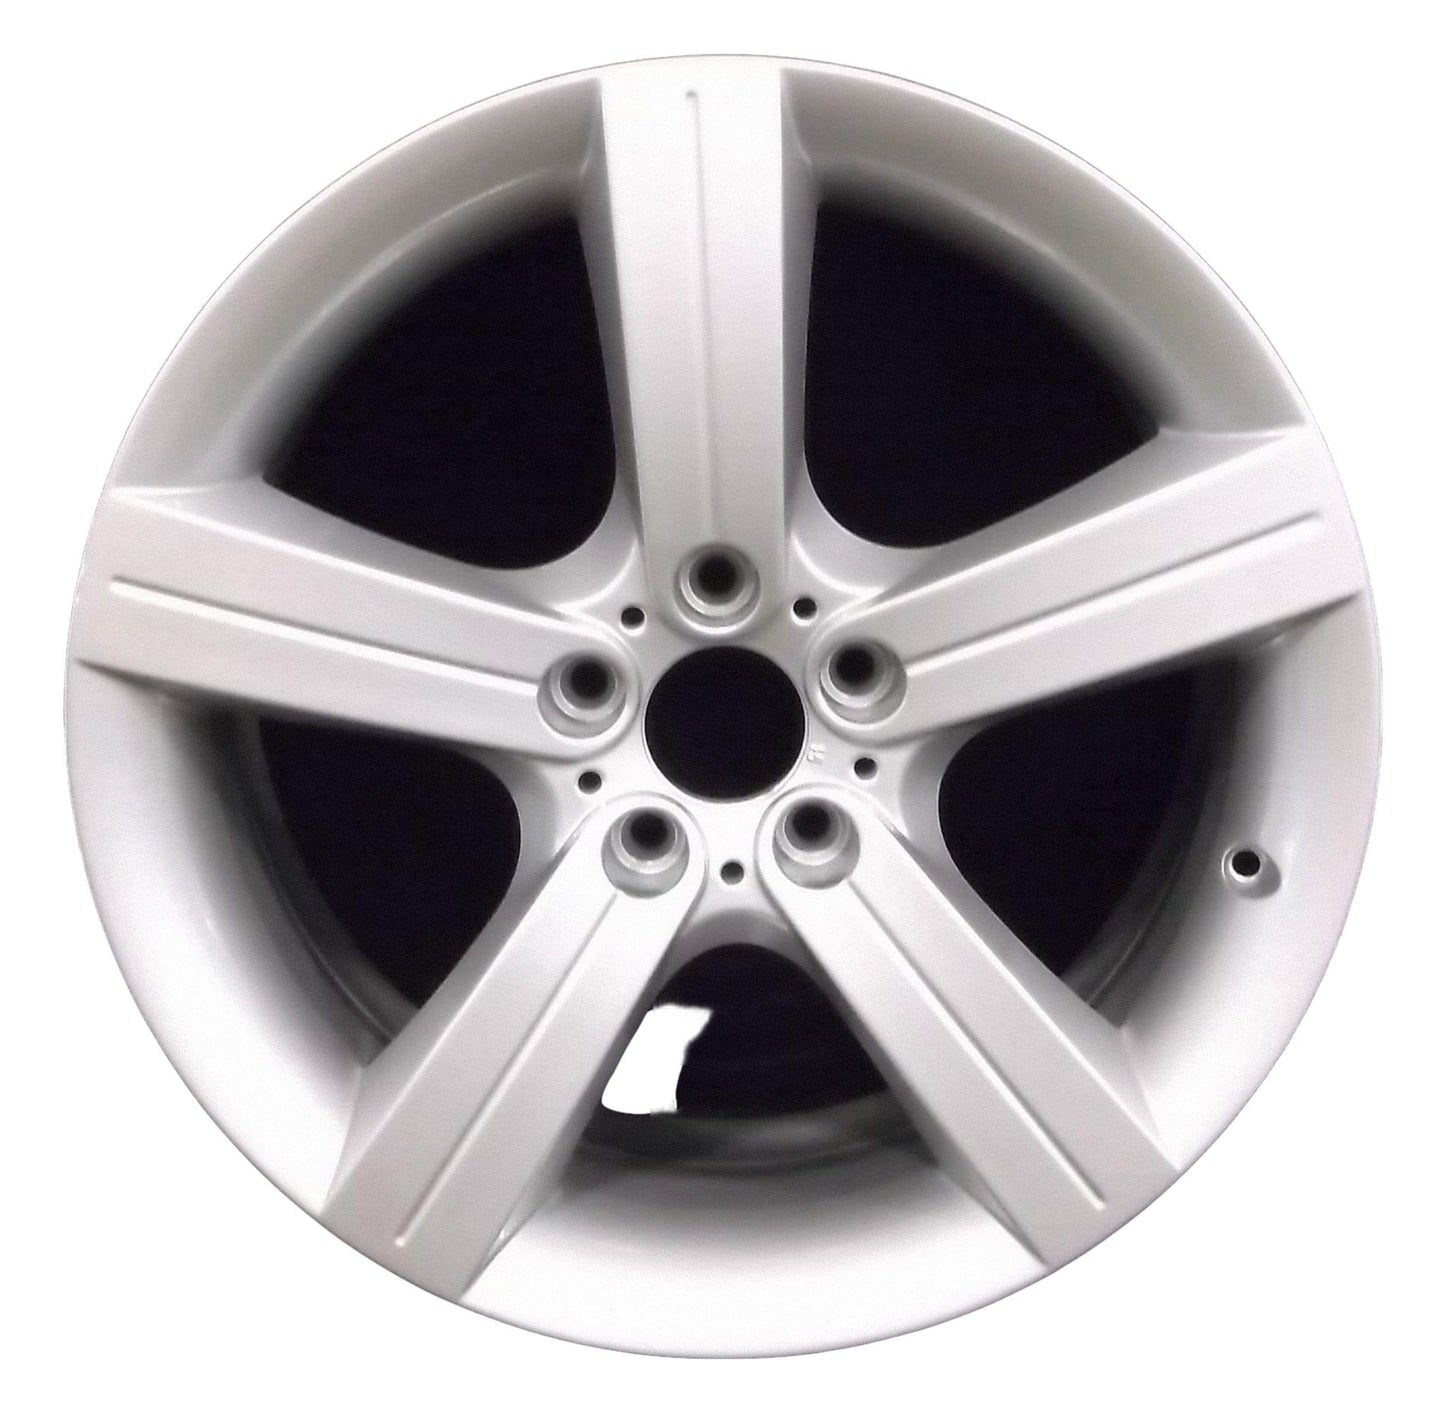 BMW 335i  2007, 2008, 2009, 2010, 2011, 2012, 2013 Factory OEM Car Wheel Size 19x9 Alloy WAO.59599RE.PS15.FF